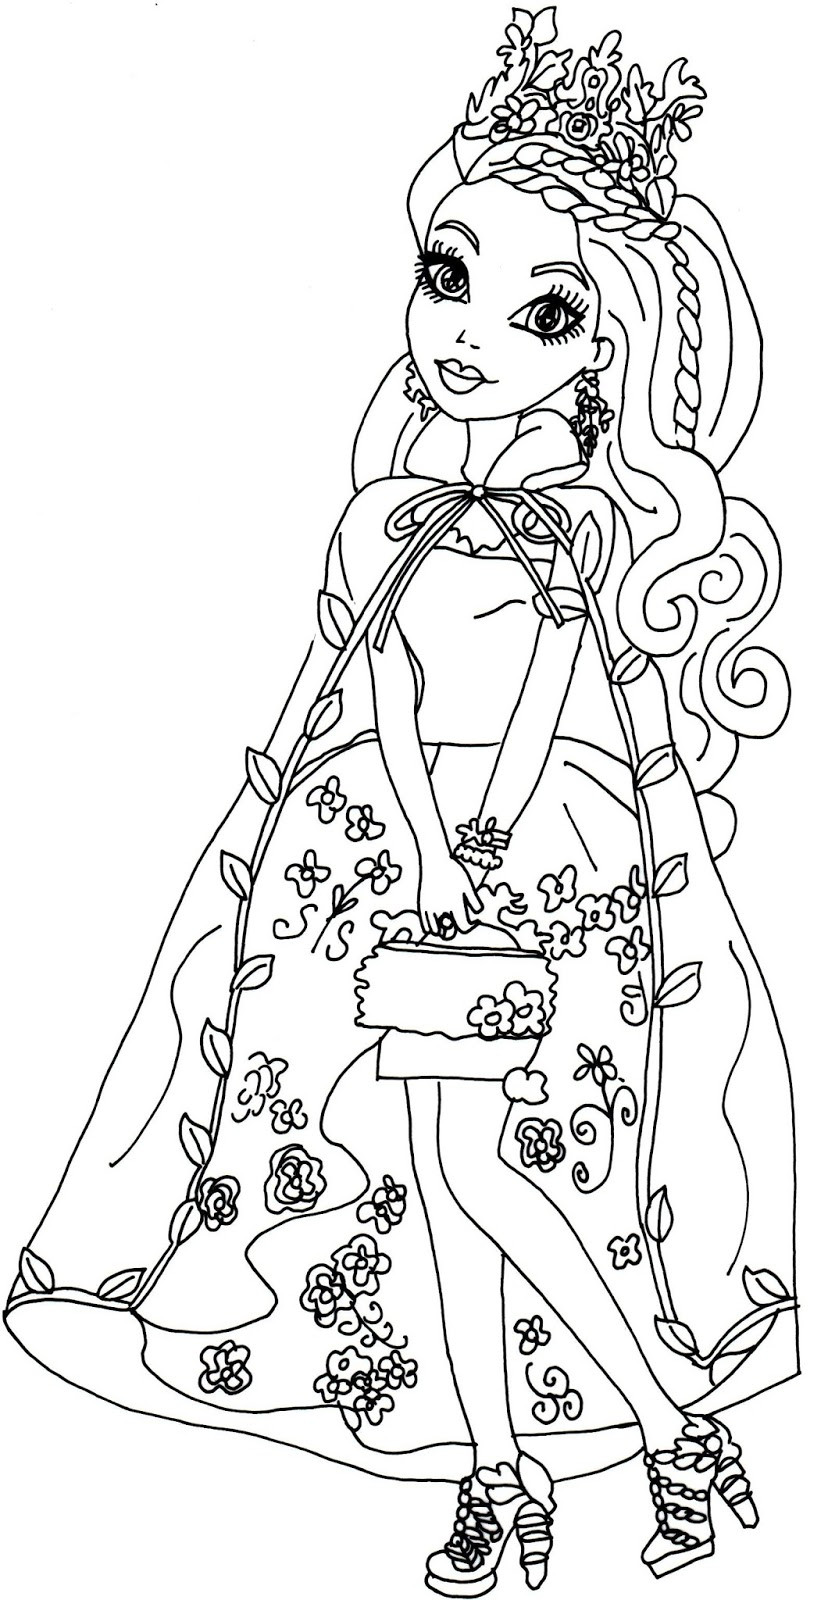 Free Resources For Printable Coloring Sheets Online
 Ever After High Coloring Pages Best Coloring Pages For Kids